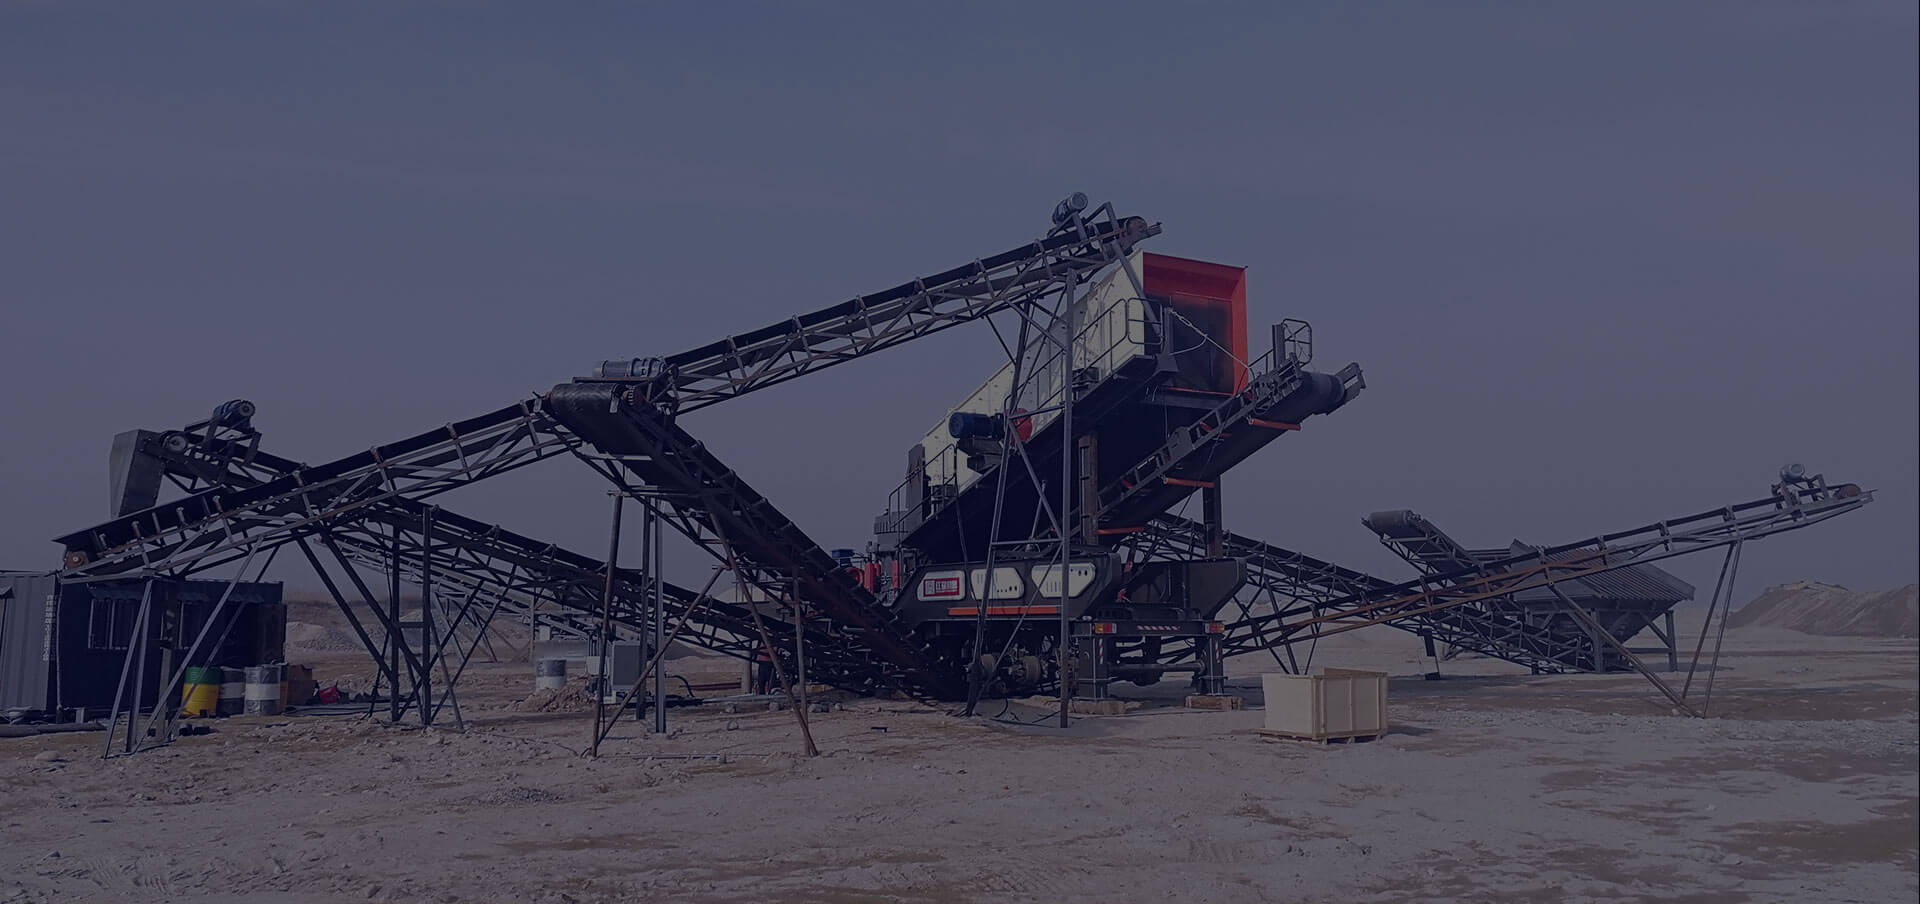 Mobile Crushing Plant images